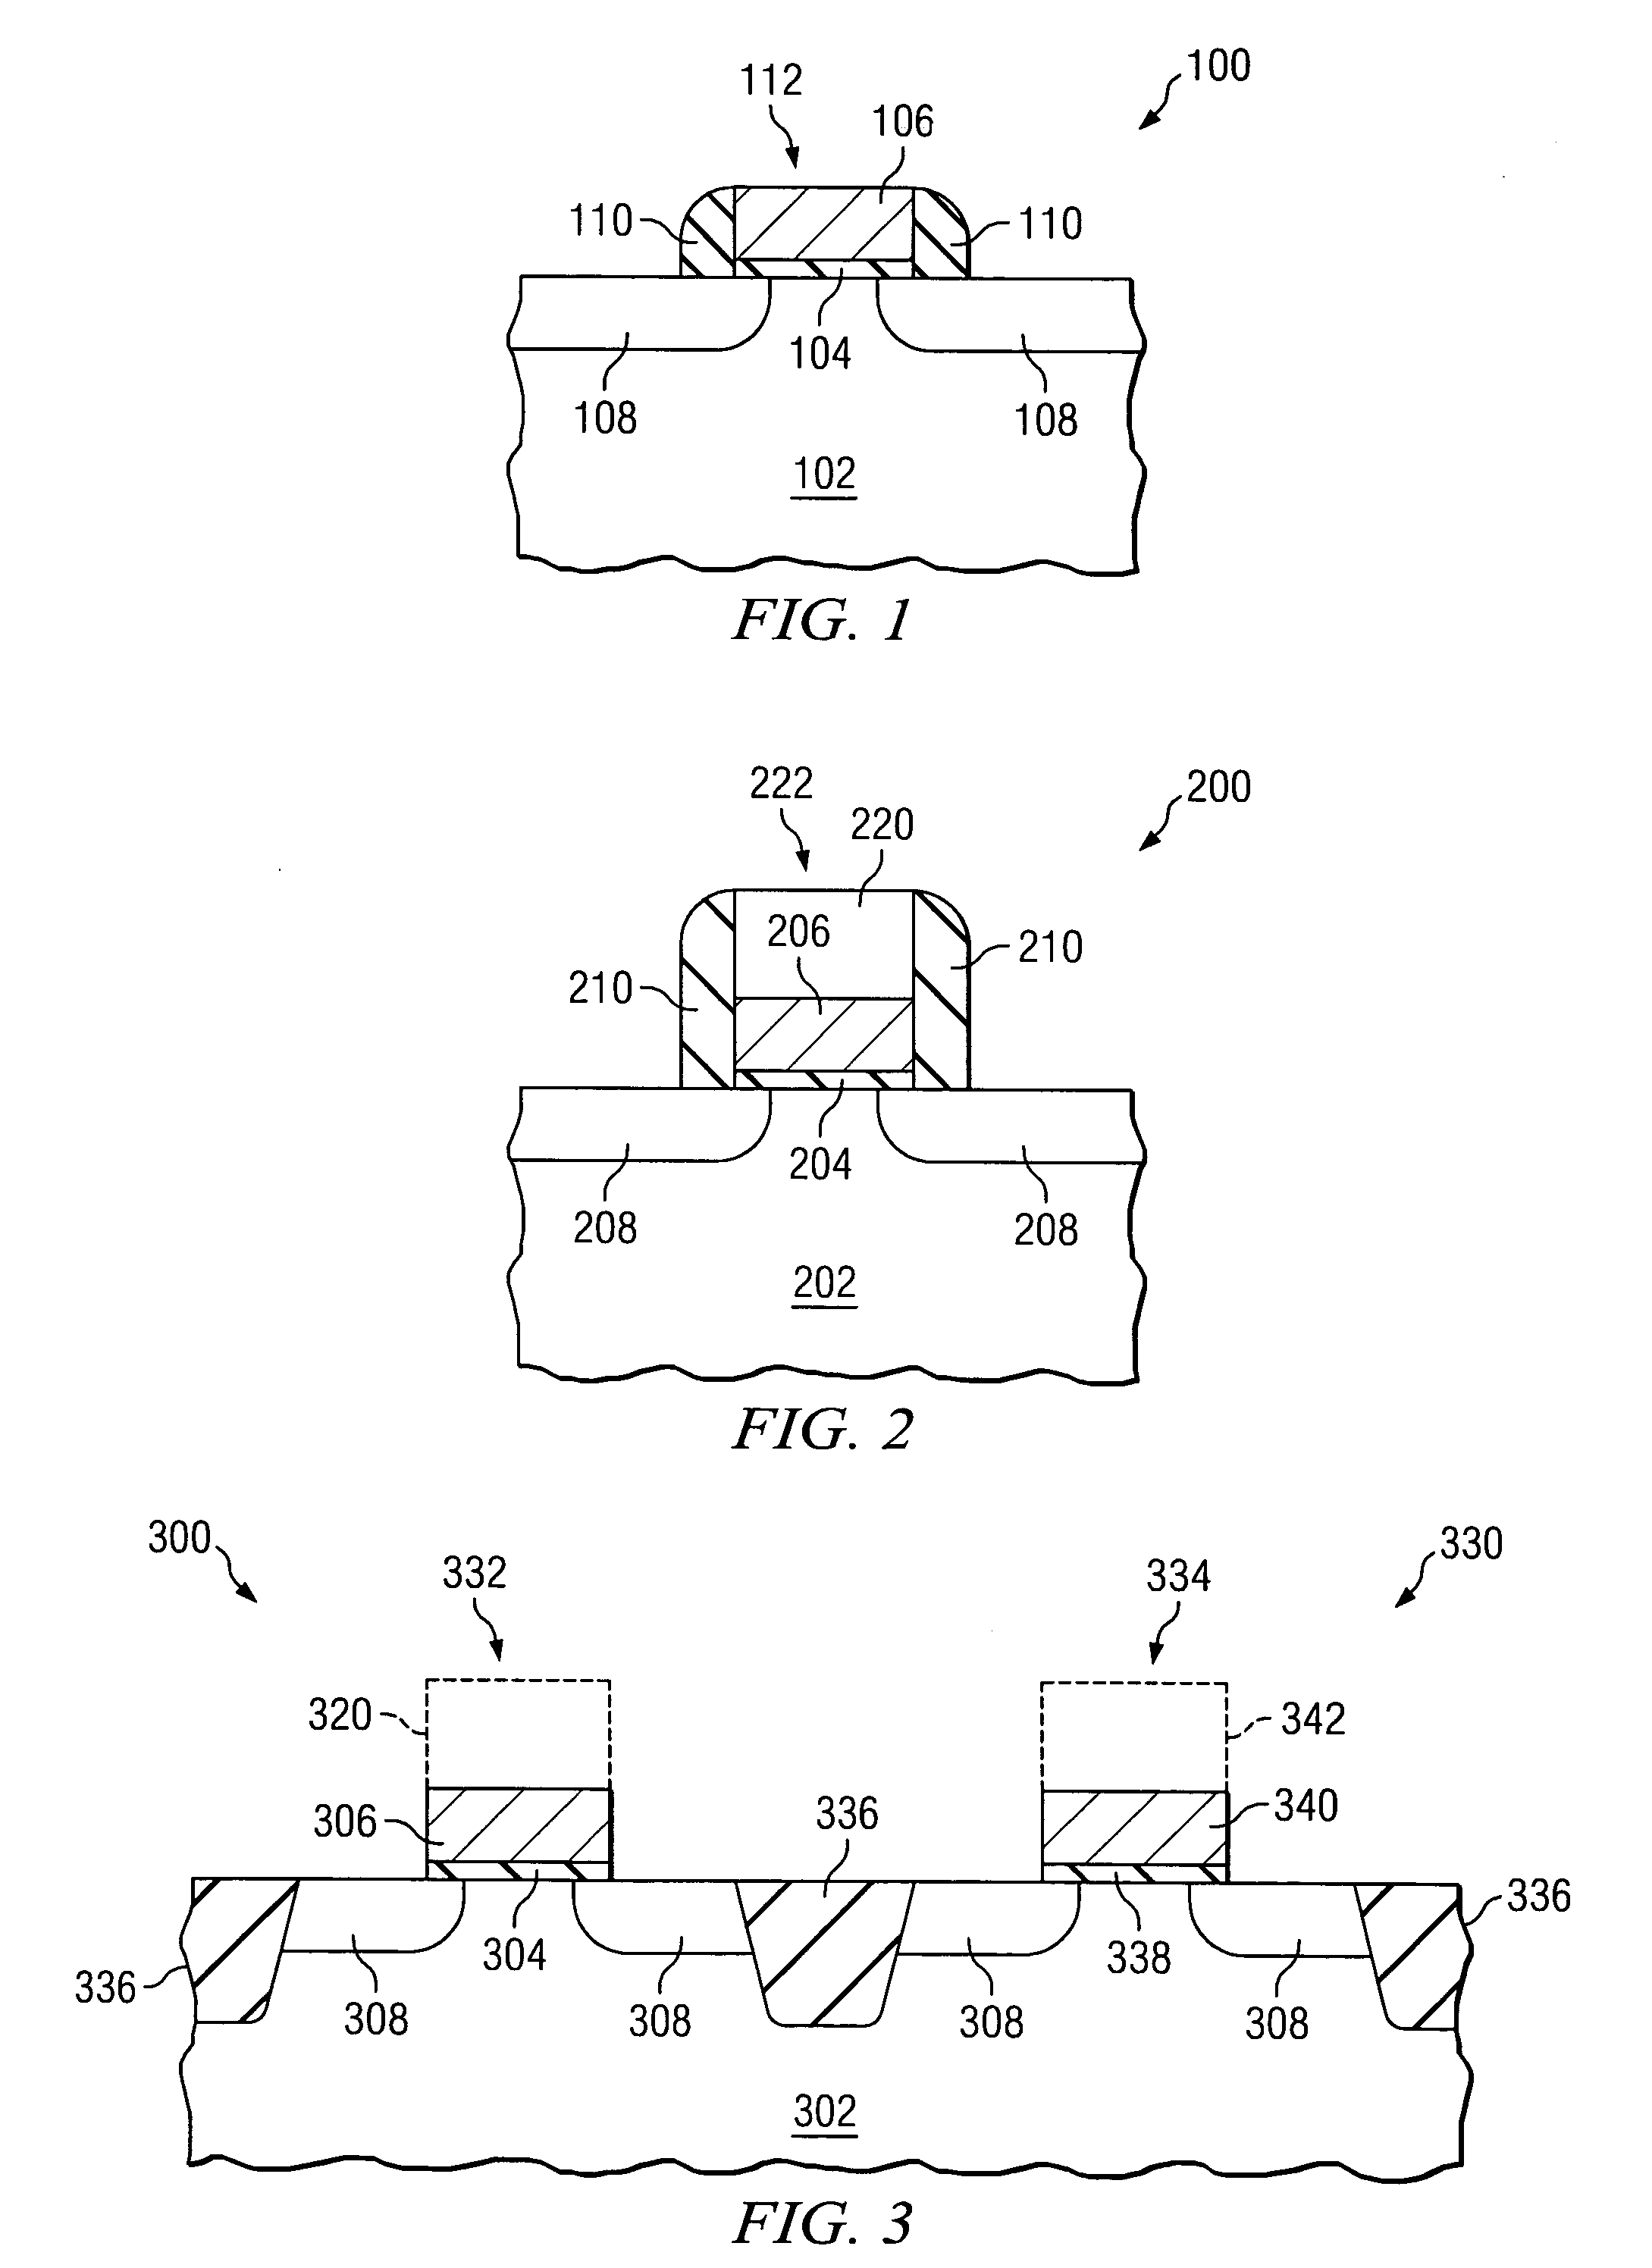 Transistors and methods of manufacture thereof